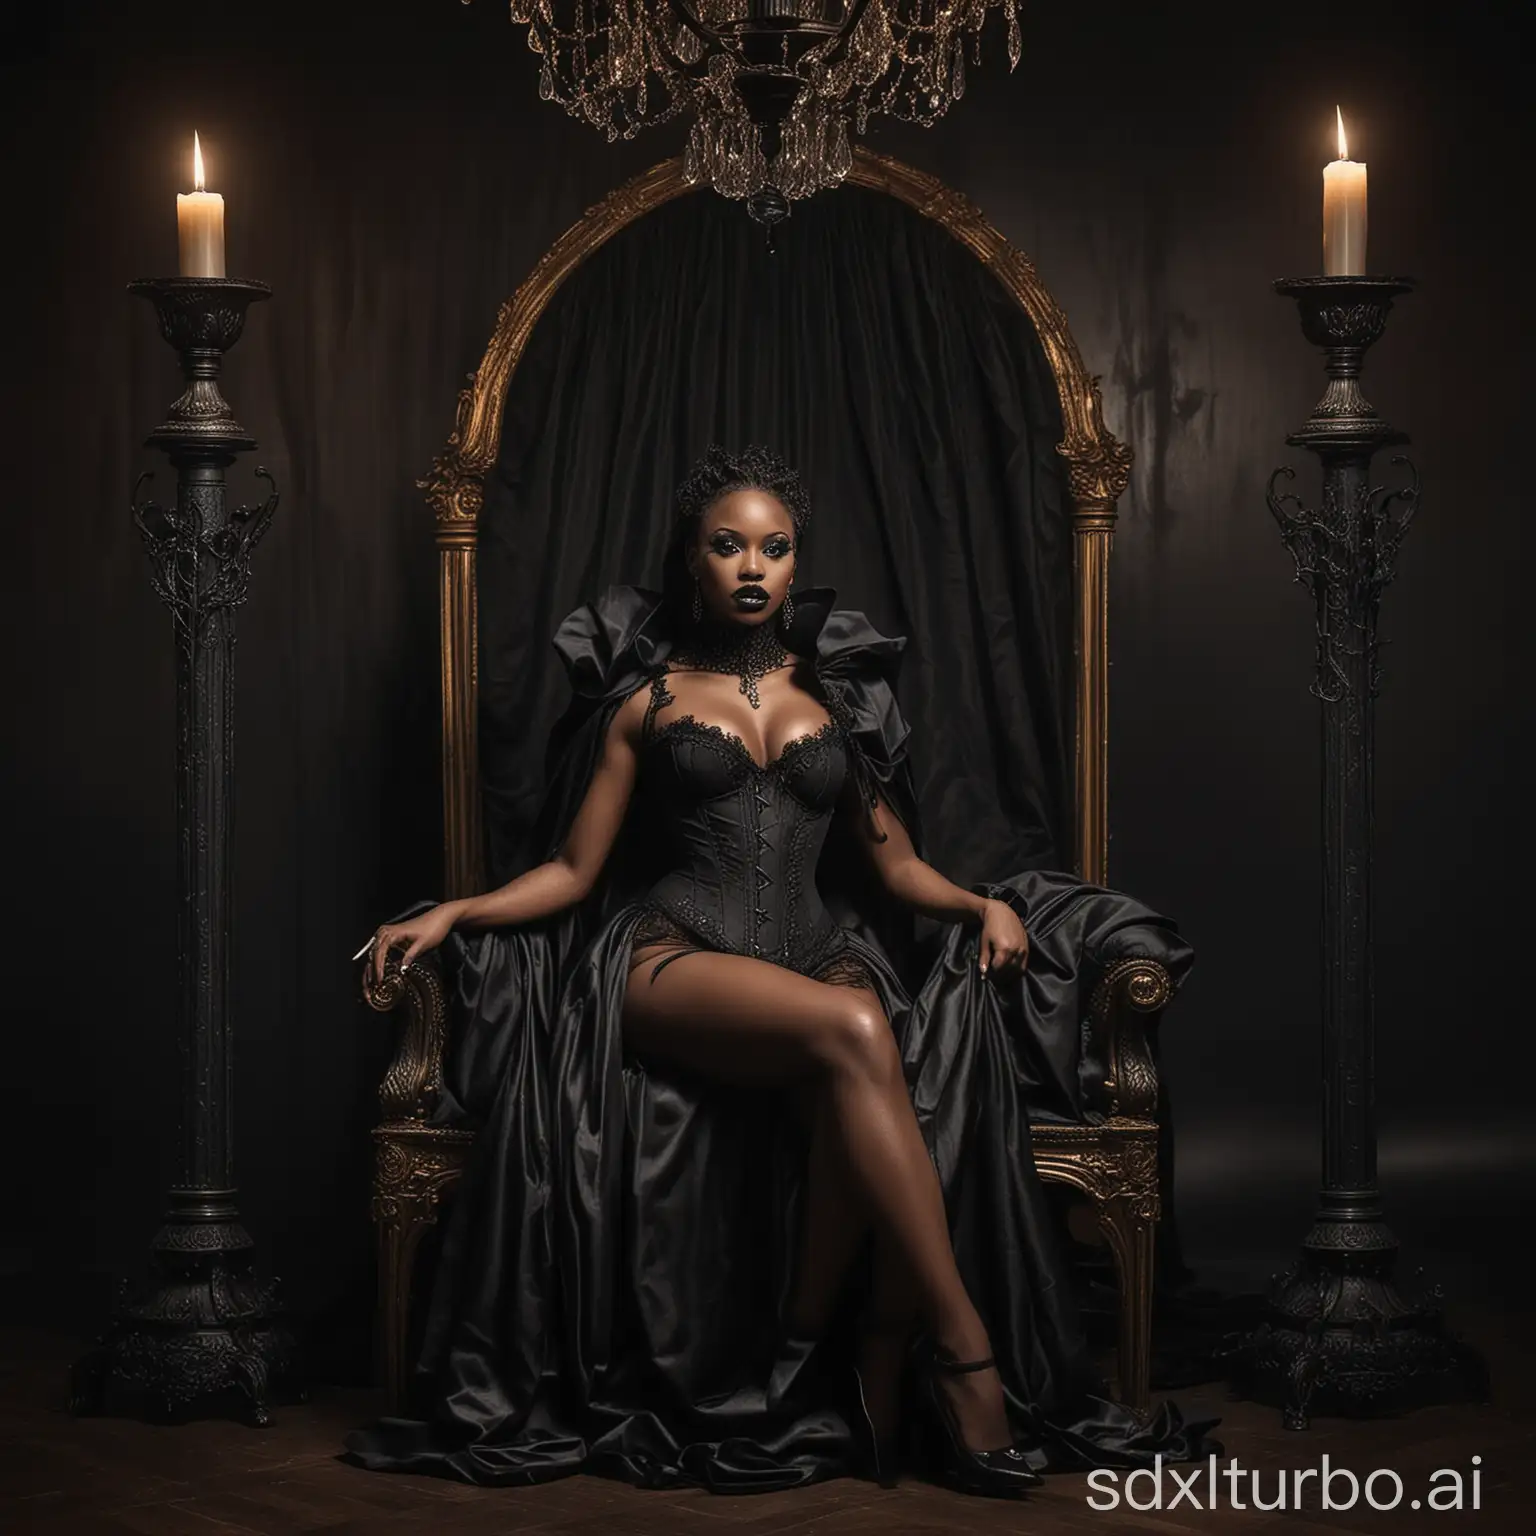 Majestic-Black-Woman-in-Corset-and-Cape-on-Throne-with-Sinister-Chandeliers